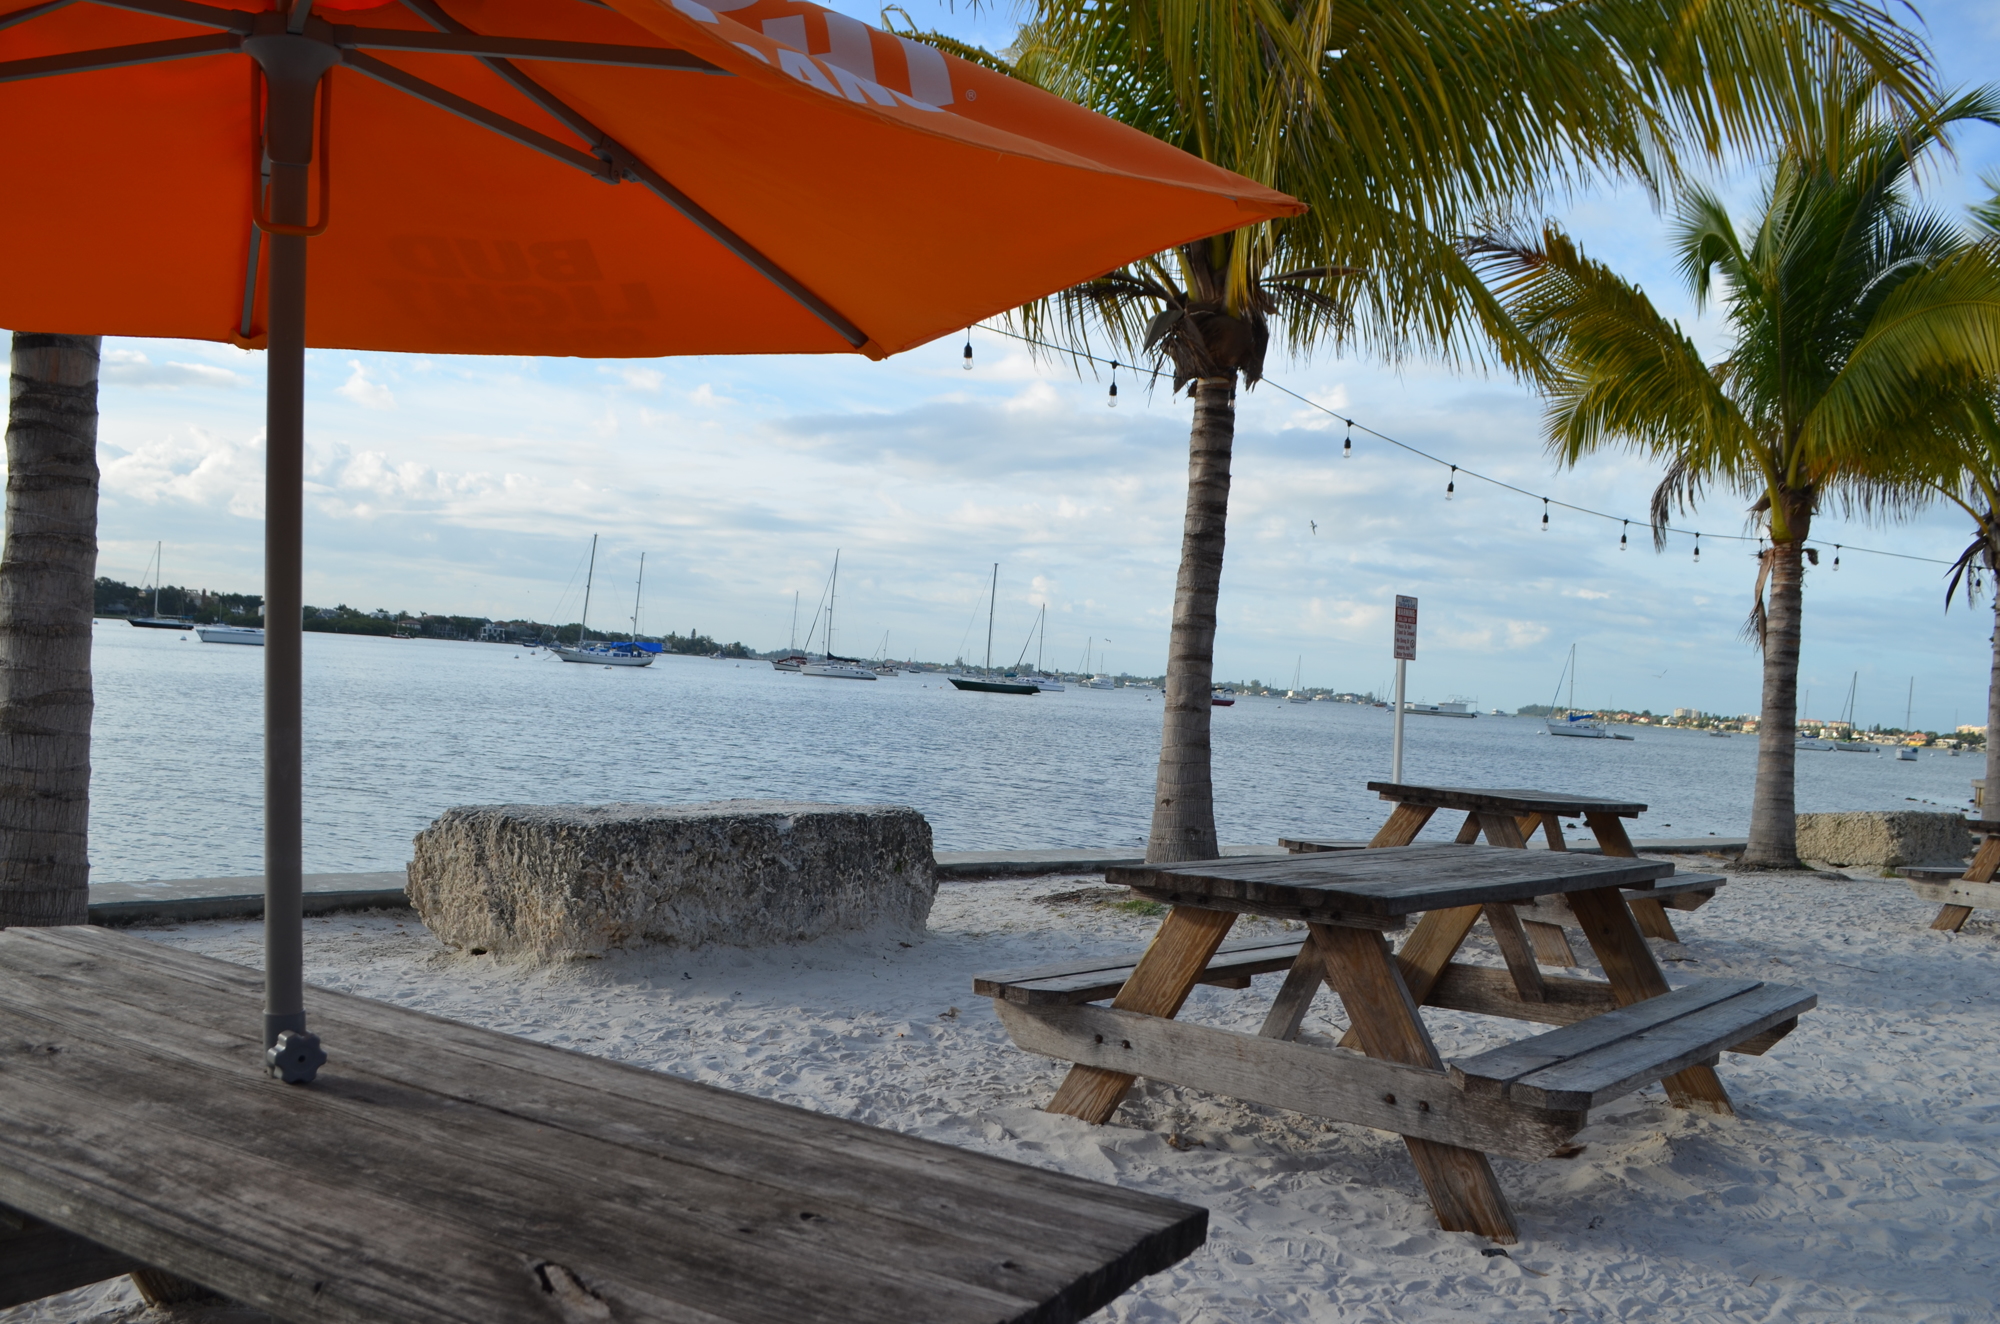 At O’Leary’s, you can dine with your toes in the sand and your pooch by your side.